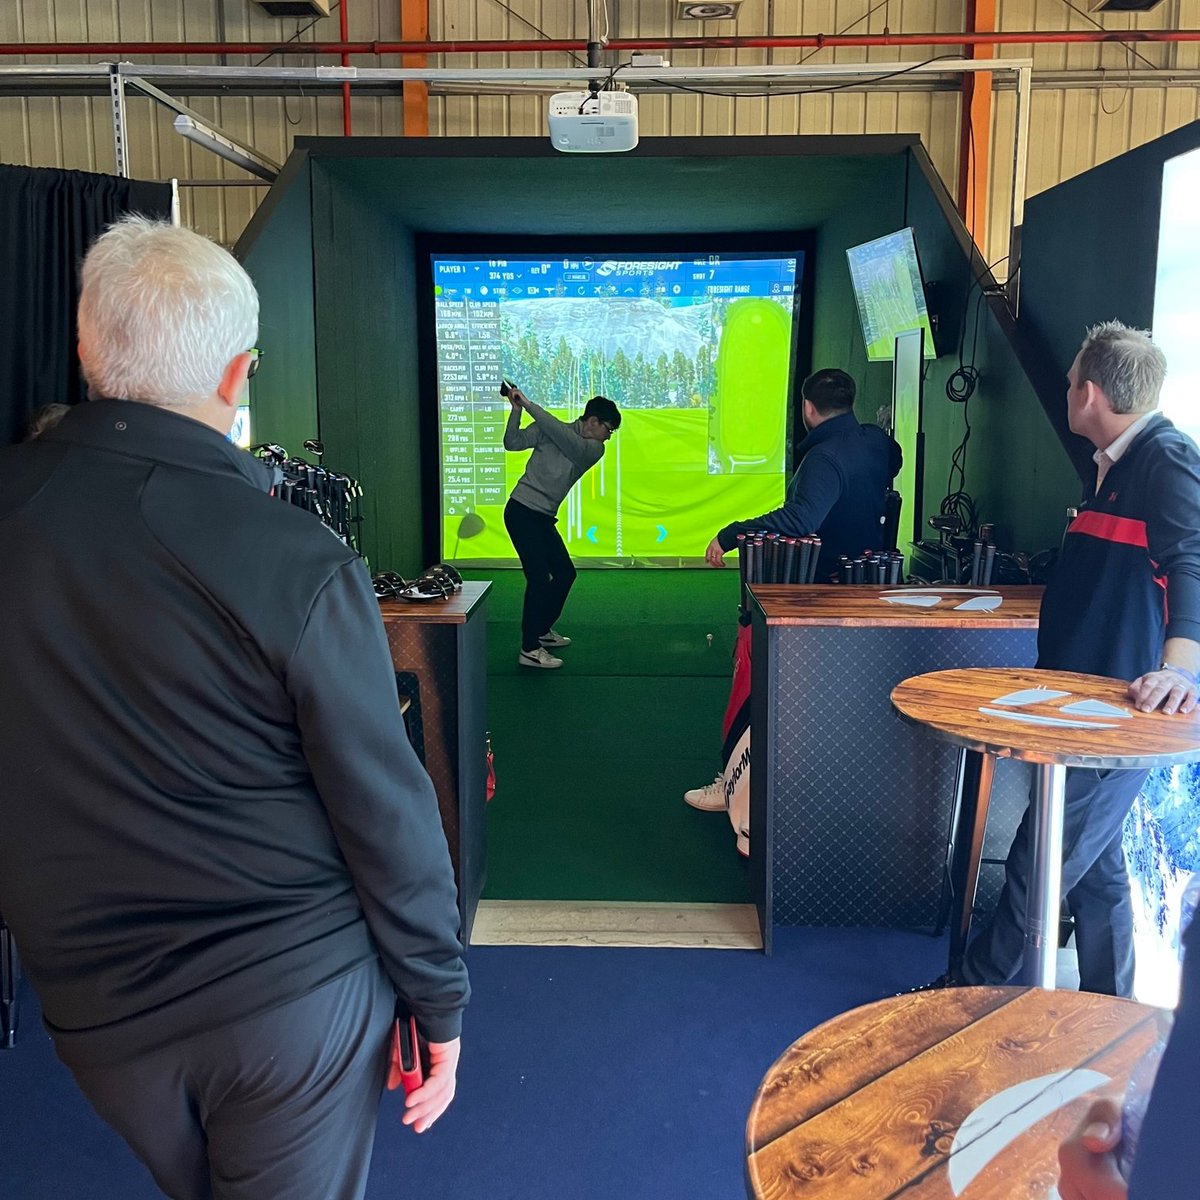 A fantastic experience was had by all yesterday at our Custom Fitting workshop hosted by @TaylorMadeTour at their HQ. We look forward to seeing many more members in the weeks ahead #ForemostEducation #HelpingYourBusinessGrow